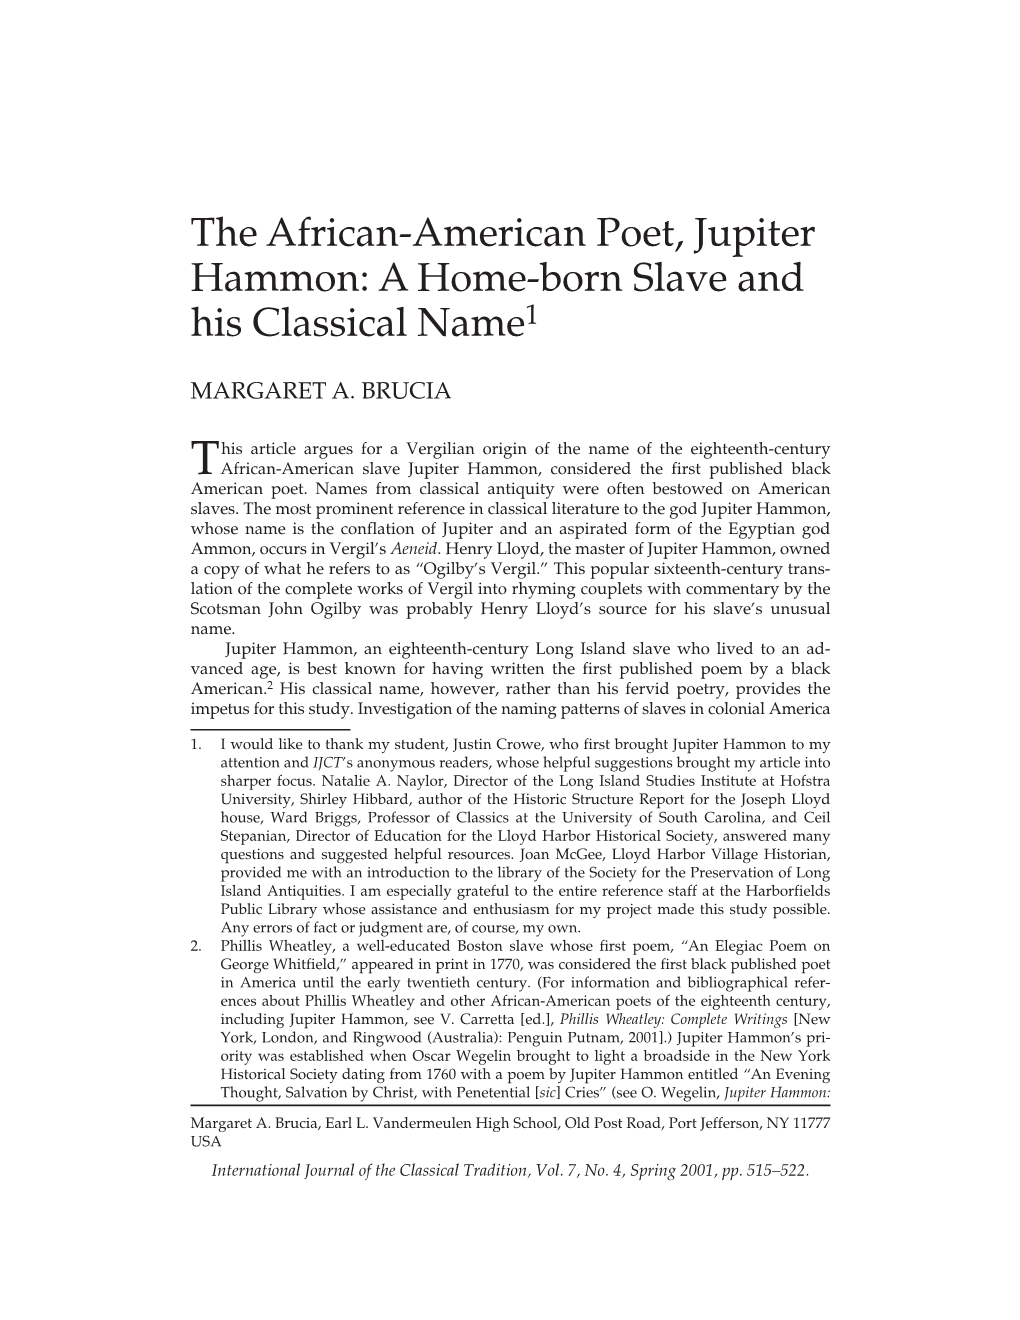 The African-American Poet, Jupiter Hammon: a Home-Born Slave and His Classical Name1